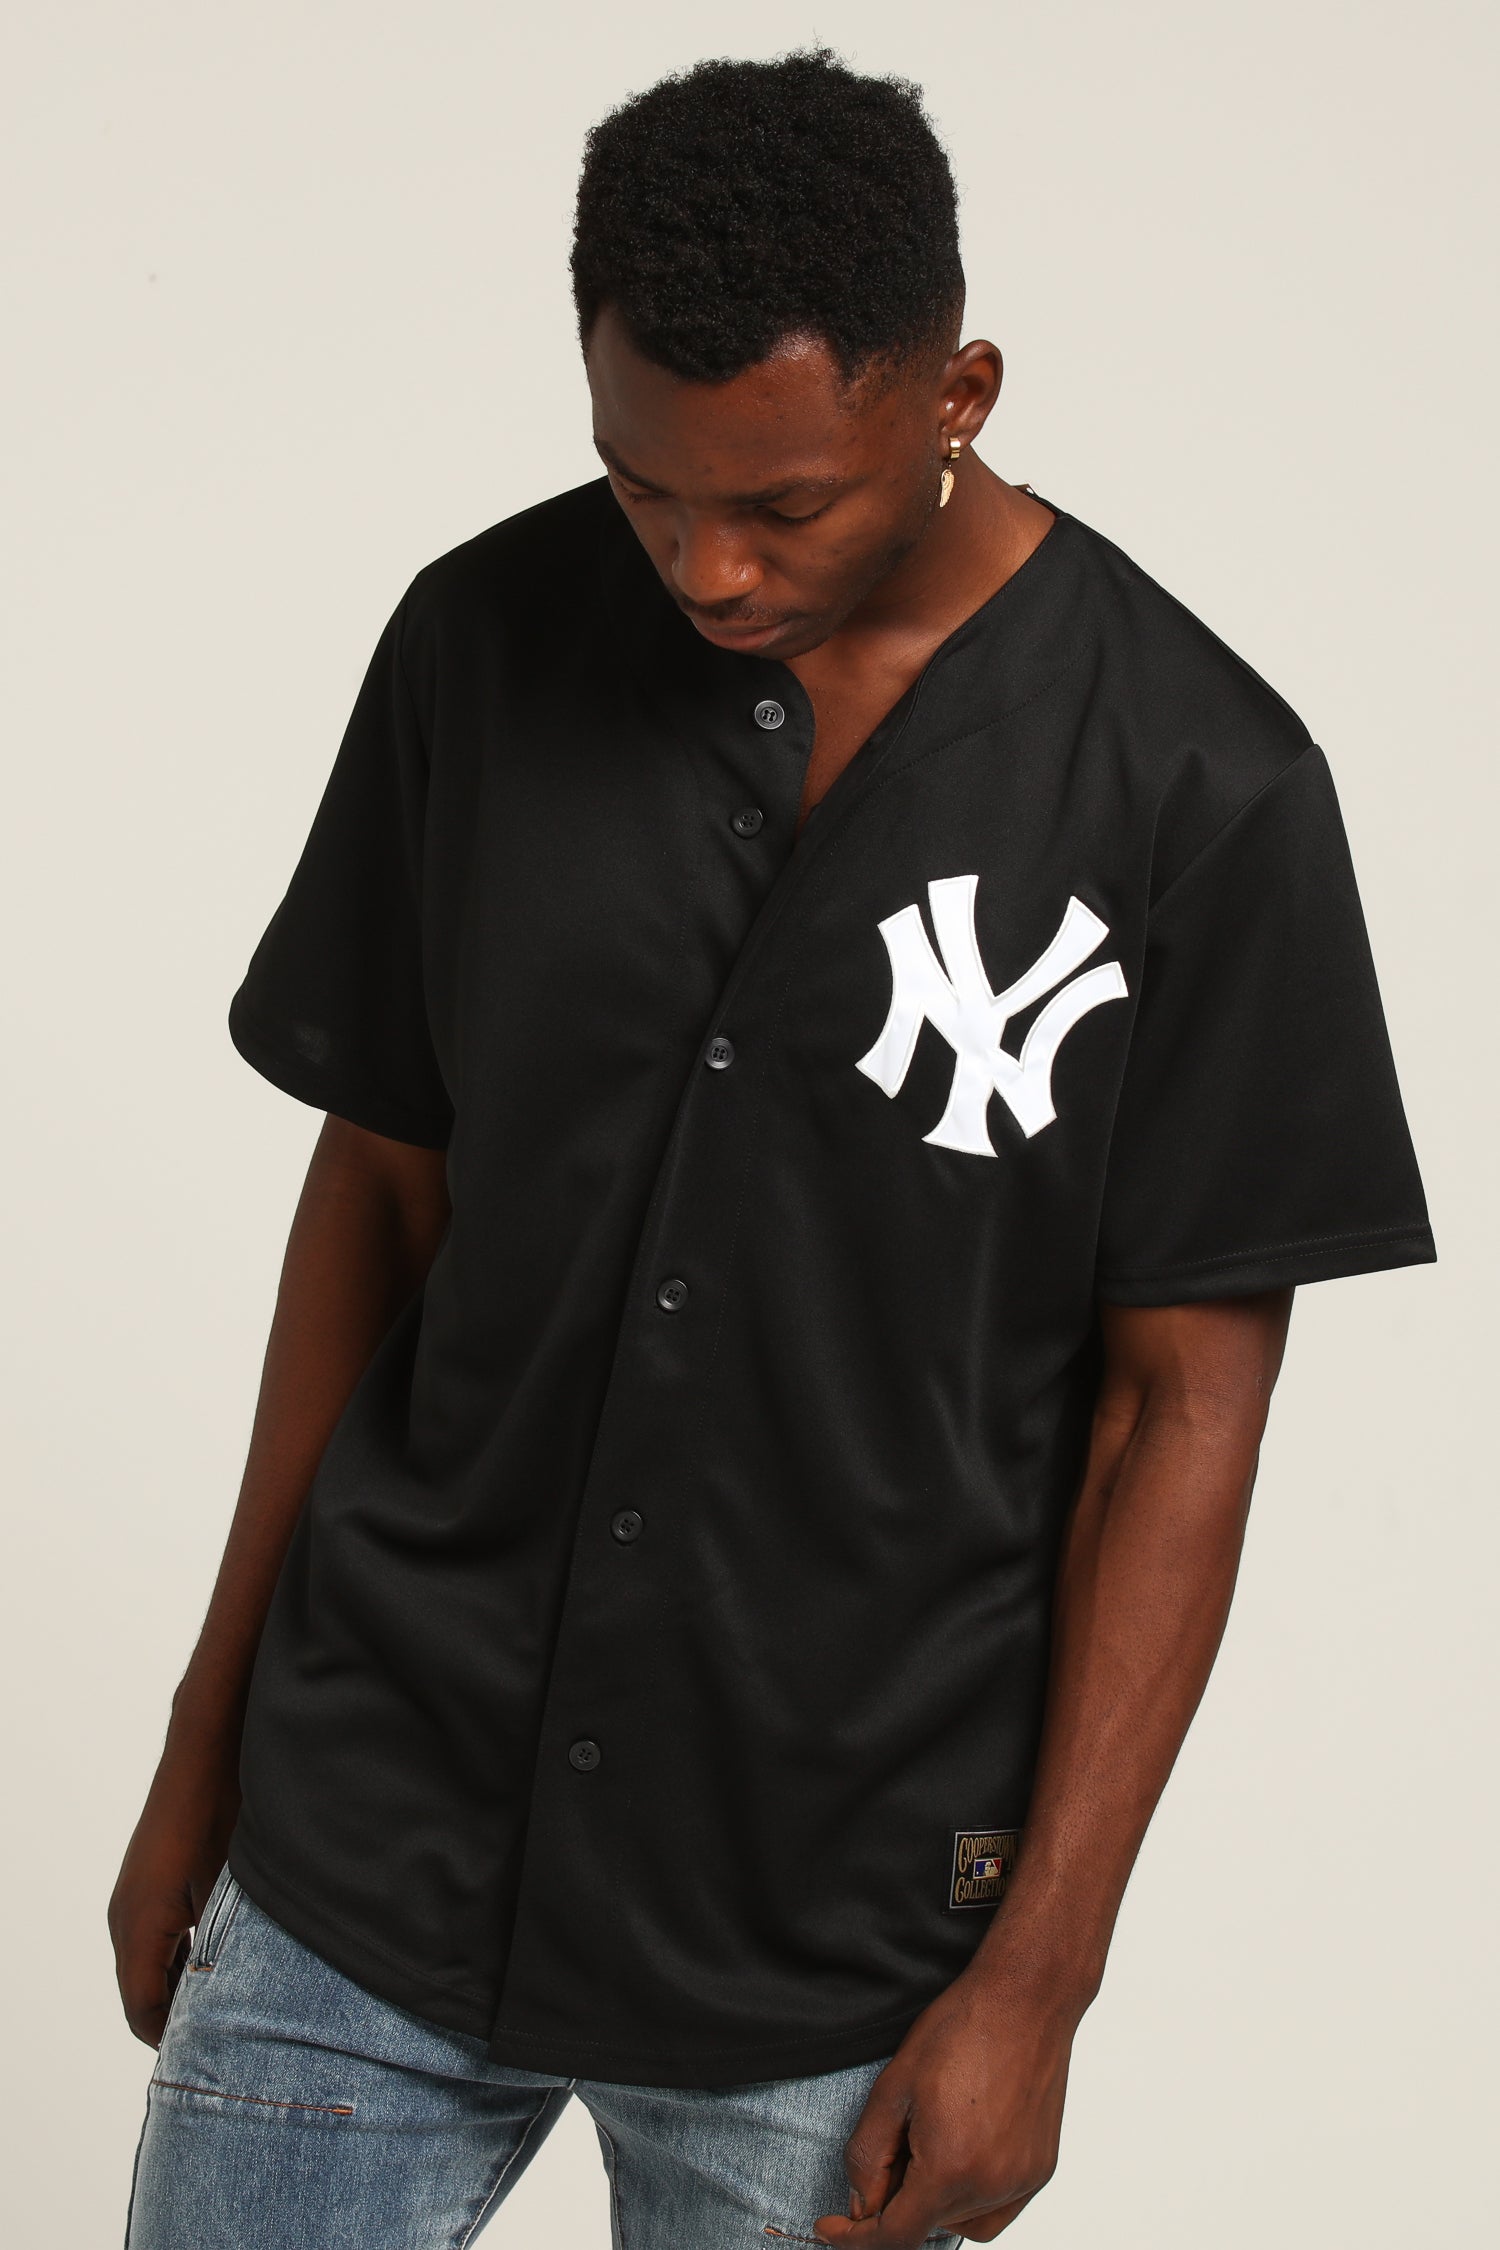 all black yankees jersey